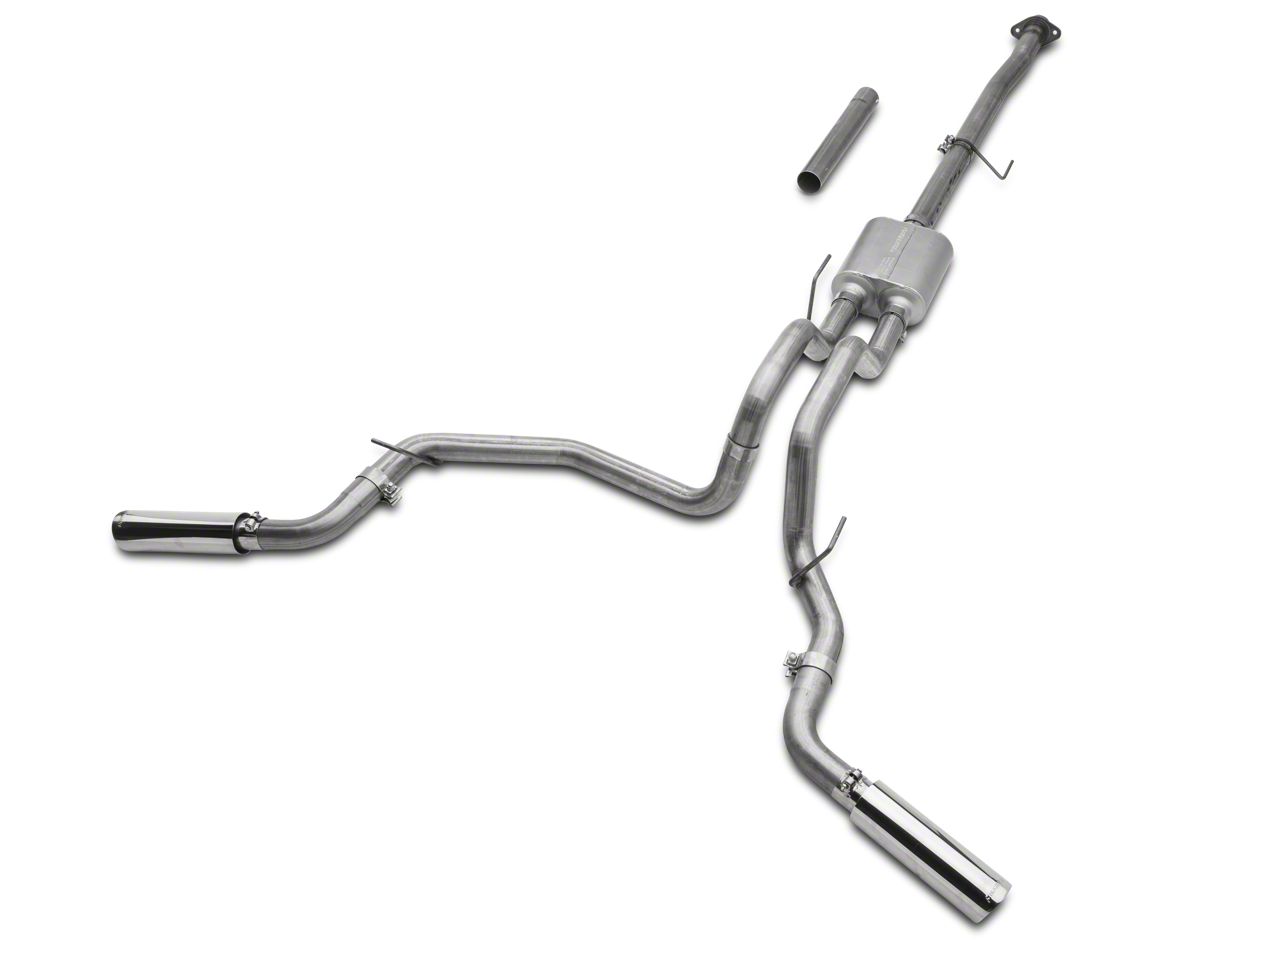 F150 Exhaust Systems 1997-2003